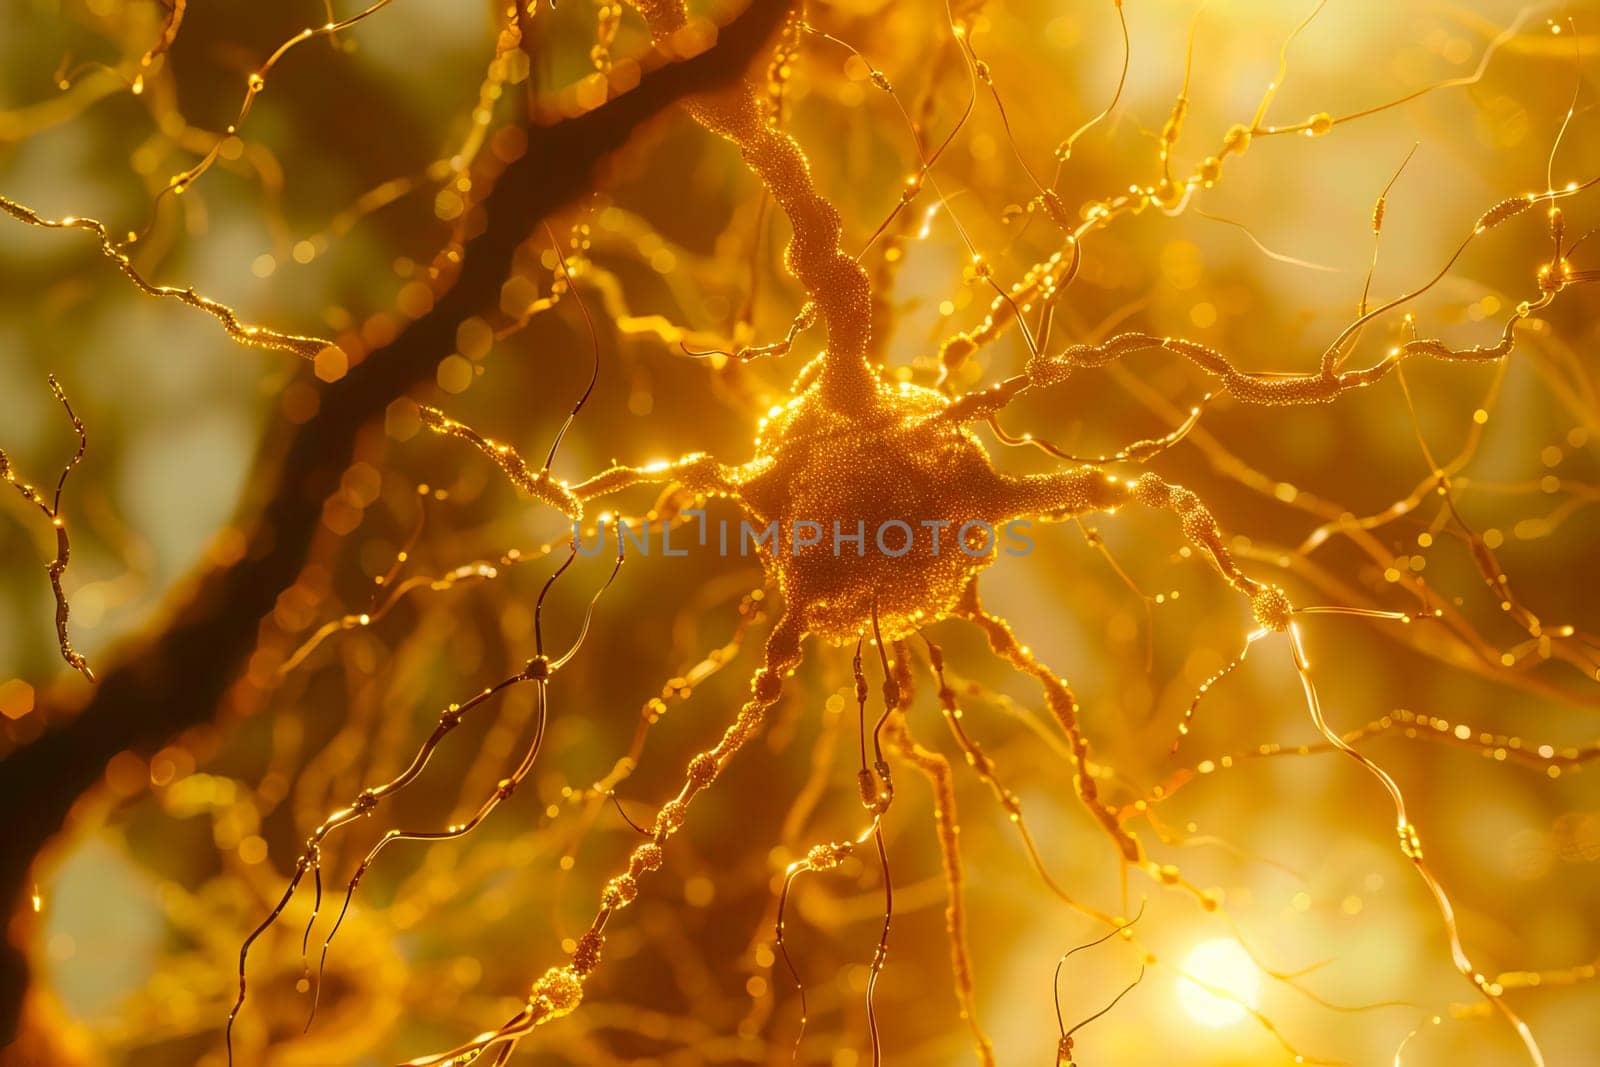 Neurons connecting through synapses with bursts of electrical activity by vladimka